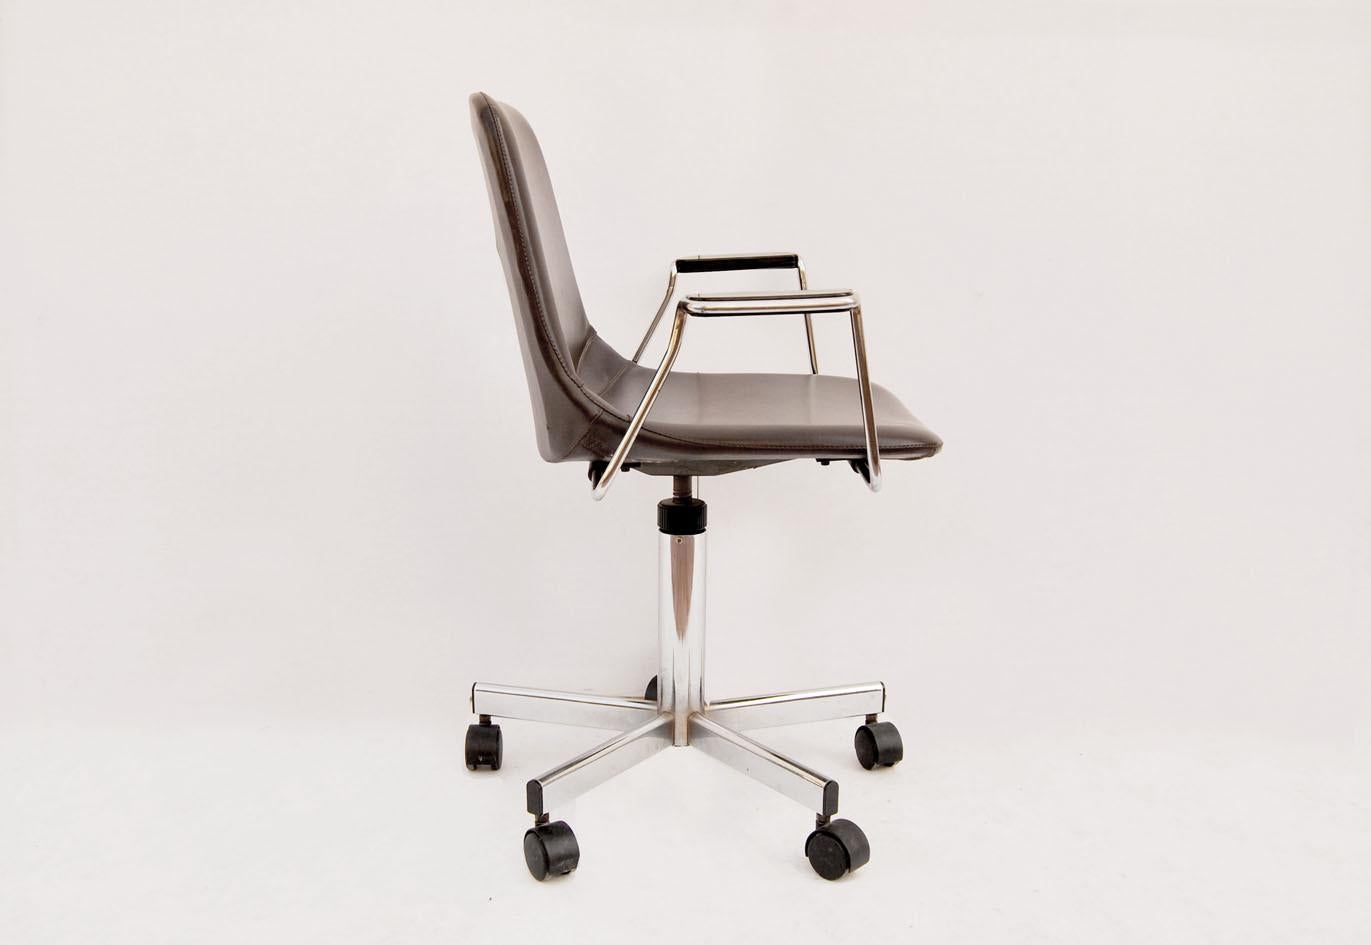 Beautiful vintage desk chair dating from the 1980s last century.
Manufactured in Italy by the company MIM mim mobili spa, this chair has a chrome-plated metal frame with integrated seat and backrest, upholstered and covered in dark brown